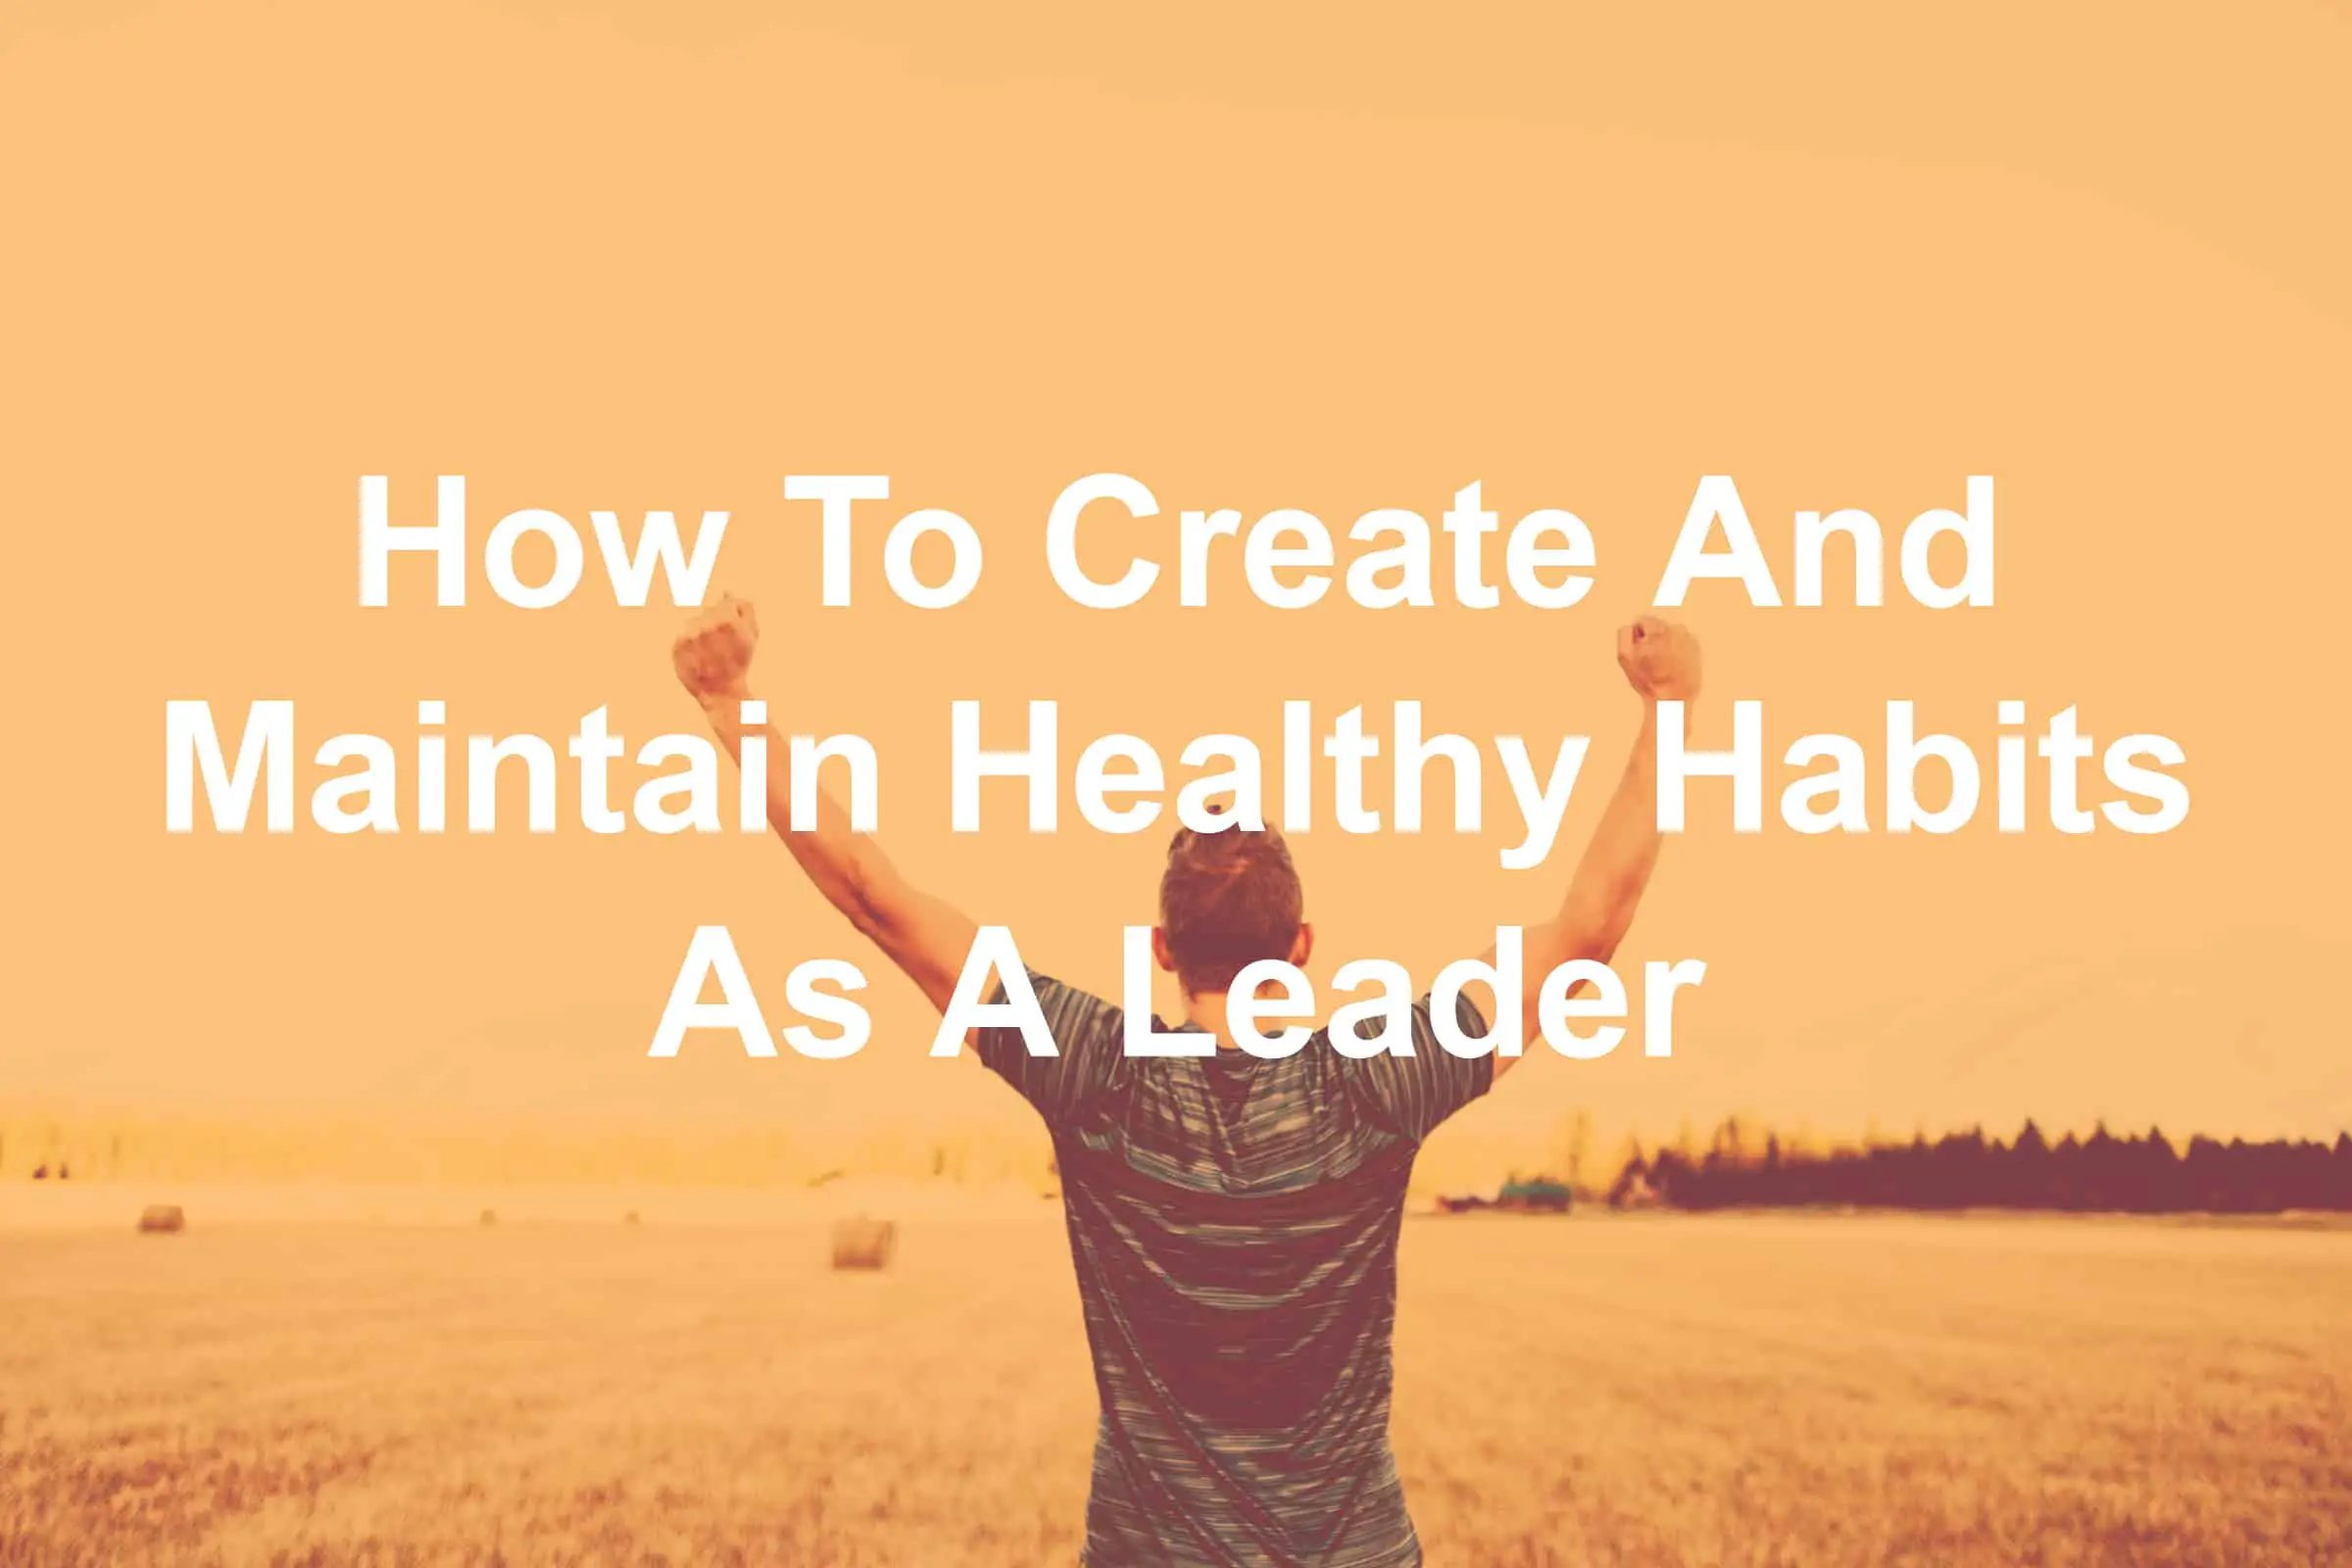 Creating and maintaining healthy habits is crucial to a healthy leader